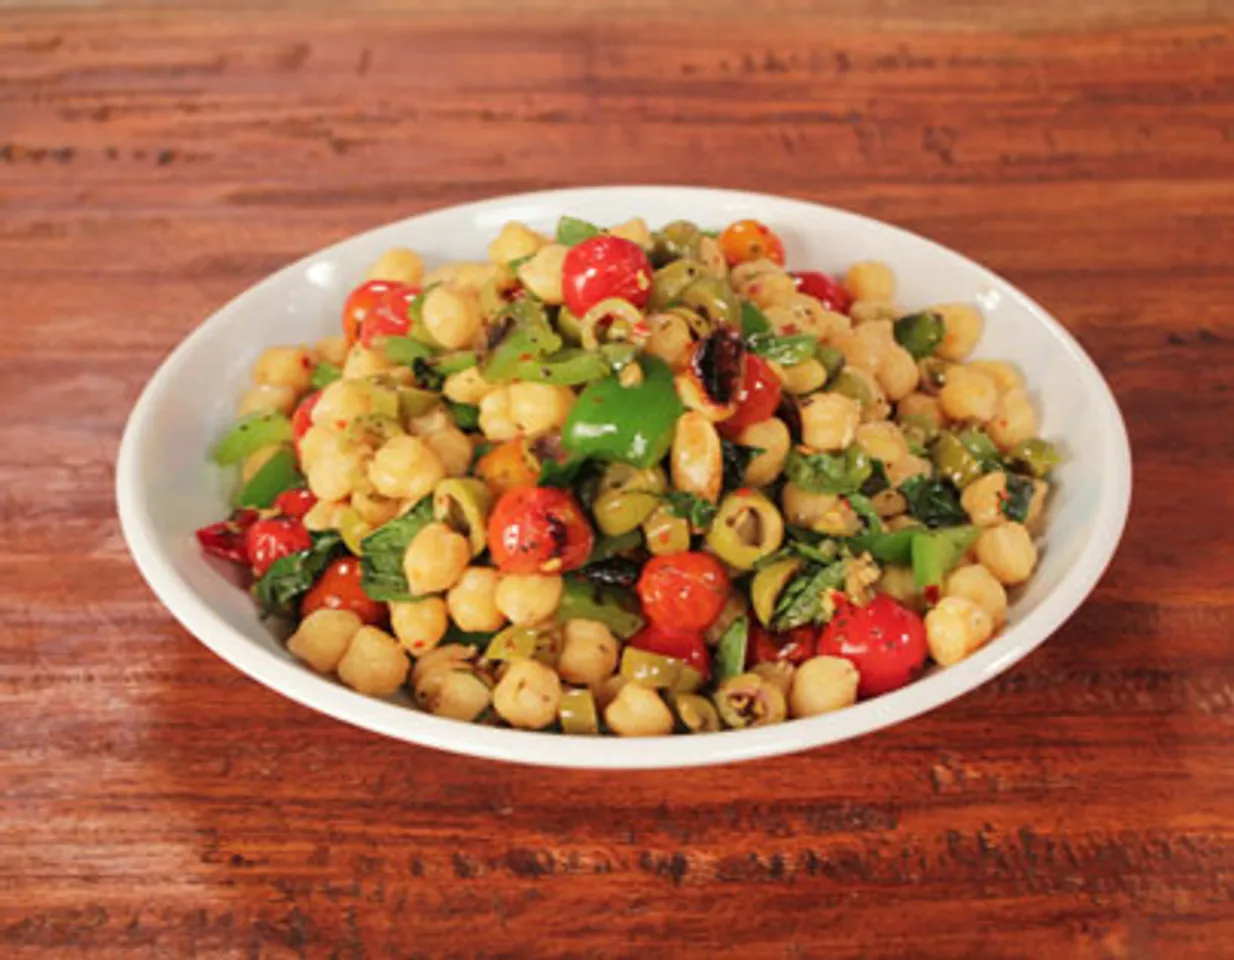 Chickpea Salad With Roasted Vegetables